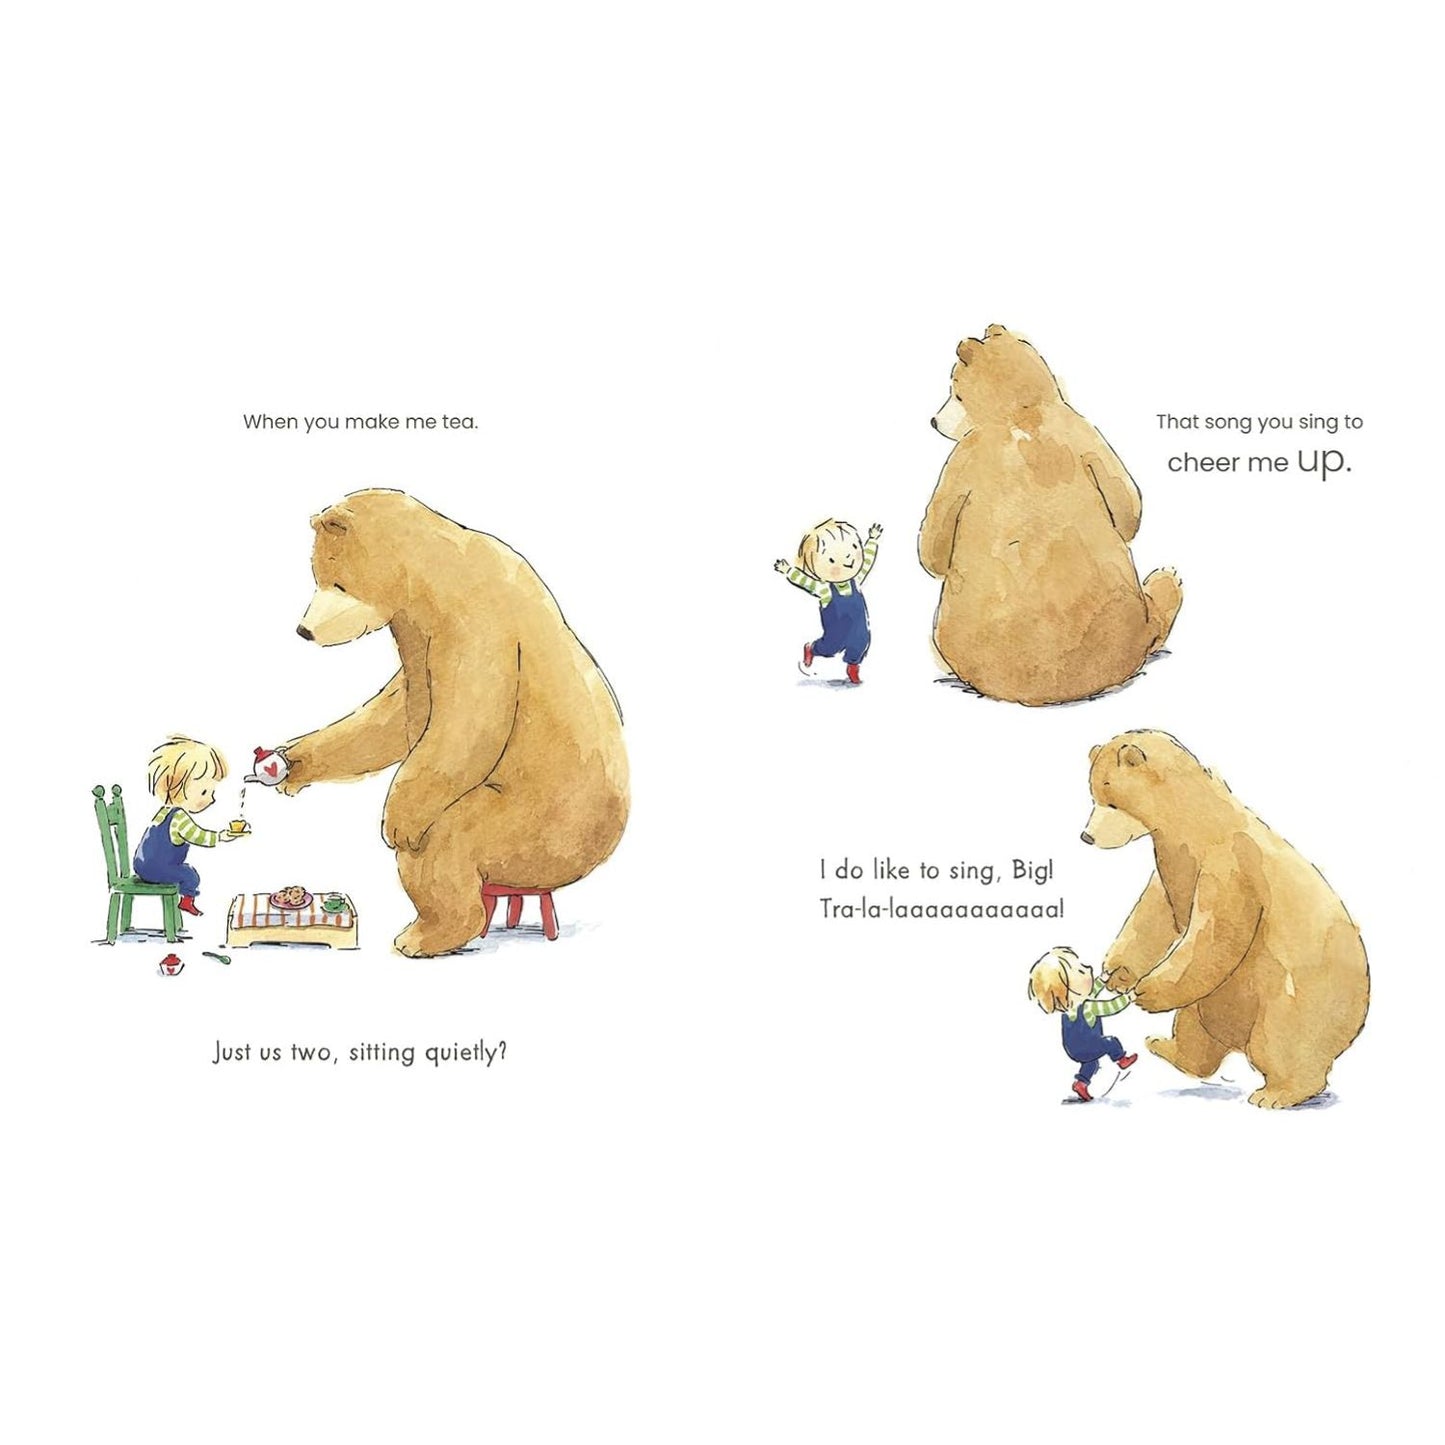 Love is in the Little Things | Hardcover | Children’s Book